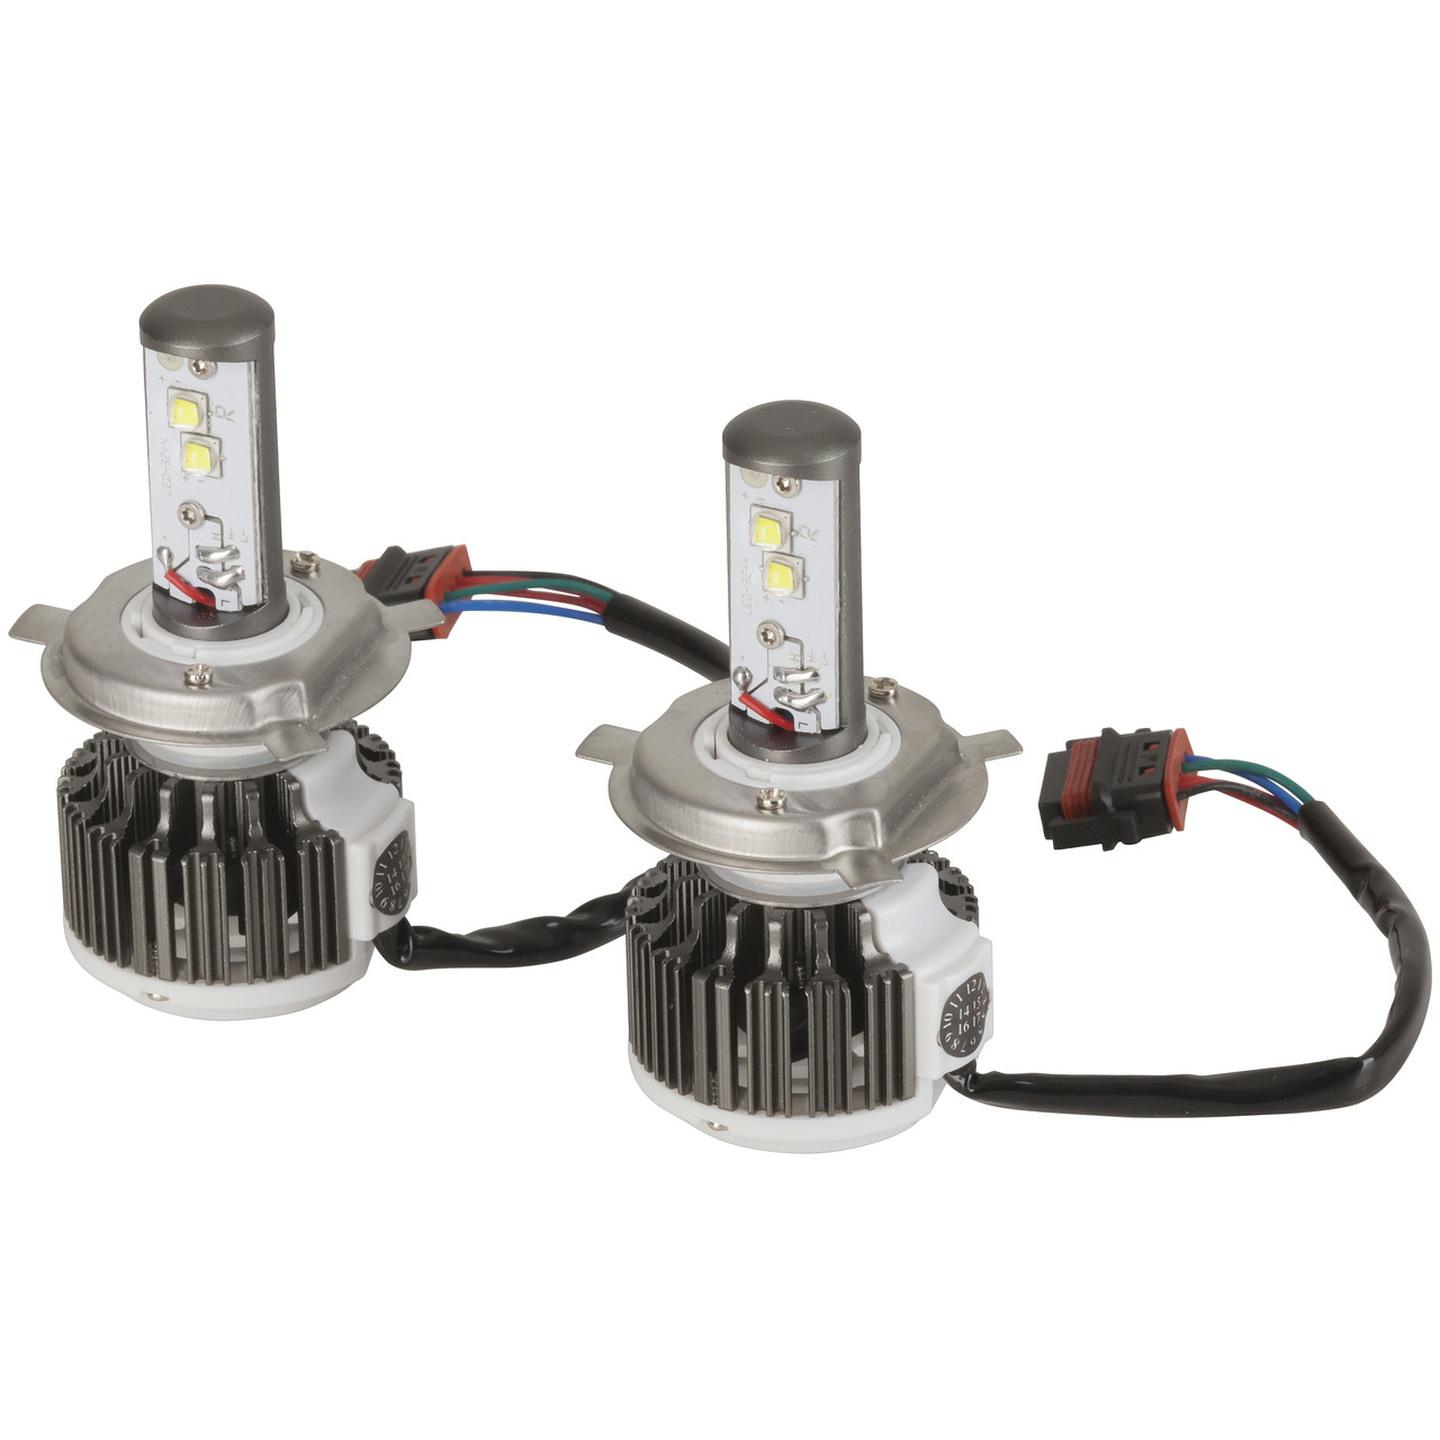 Headlamp kits with luxeon Z ES LEDs